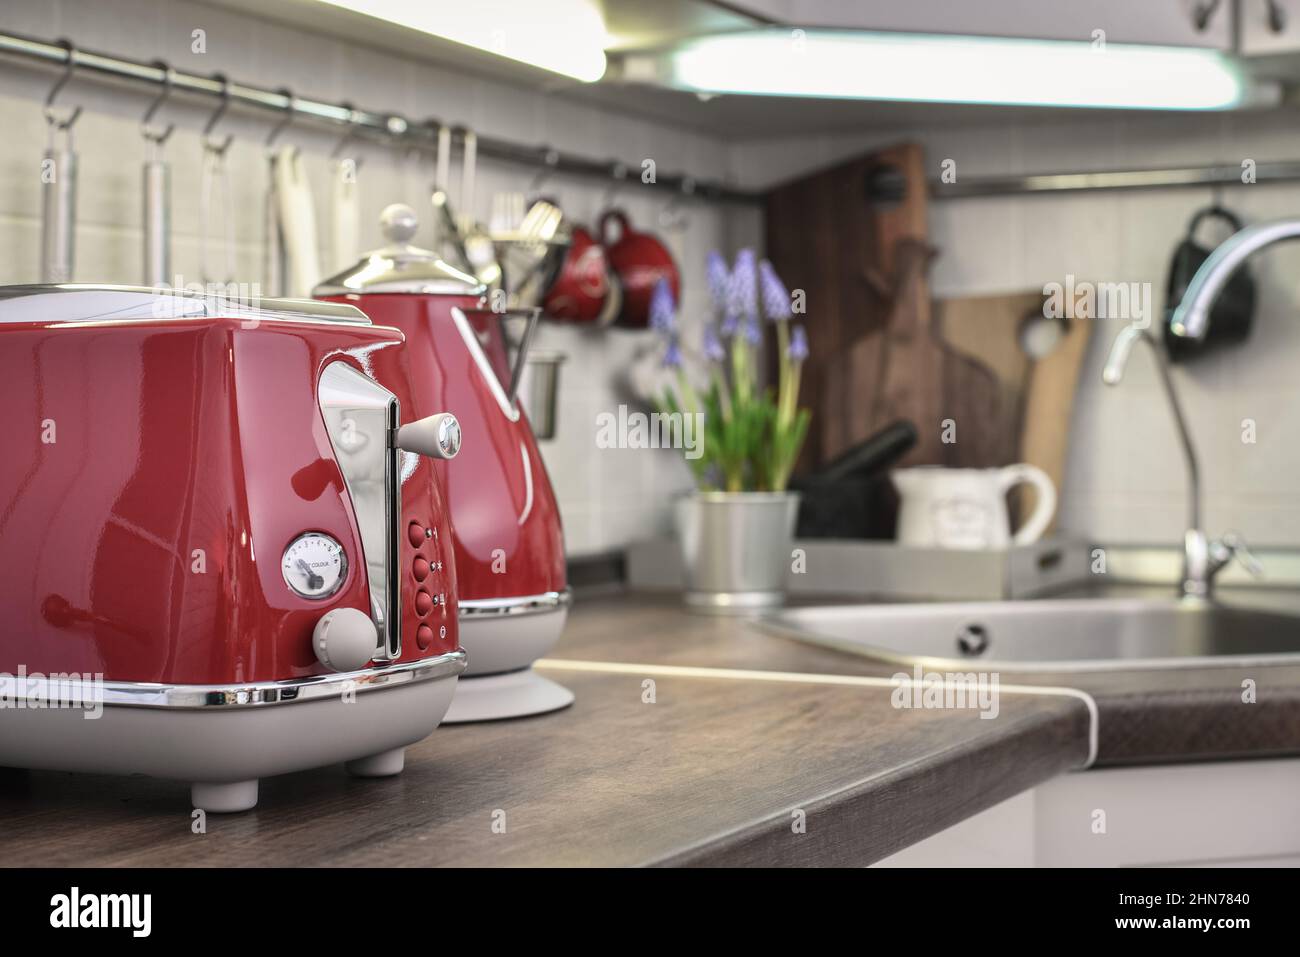 https://c8.alamy.com/comp/2HN7840/red-toaster-and-electric-kettle-in-retro-slile-on-tabletop-in-kitchen-interior-2HN7840.jpg